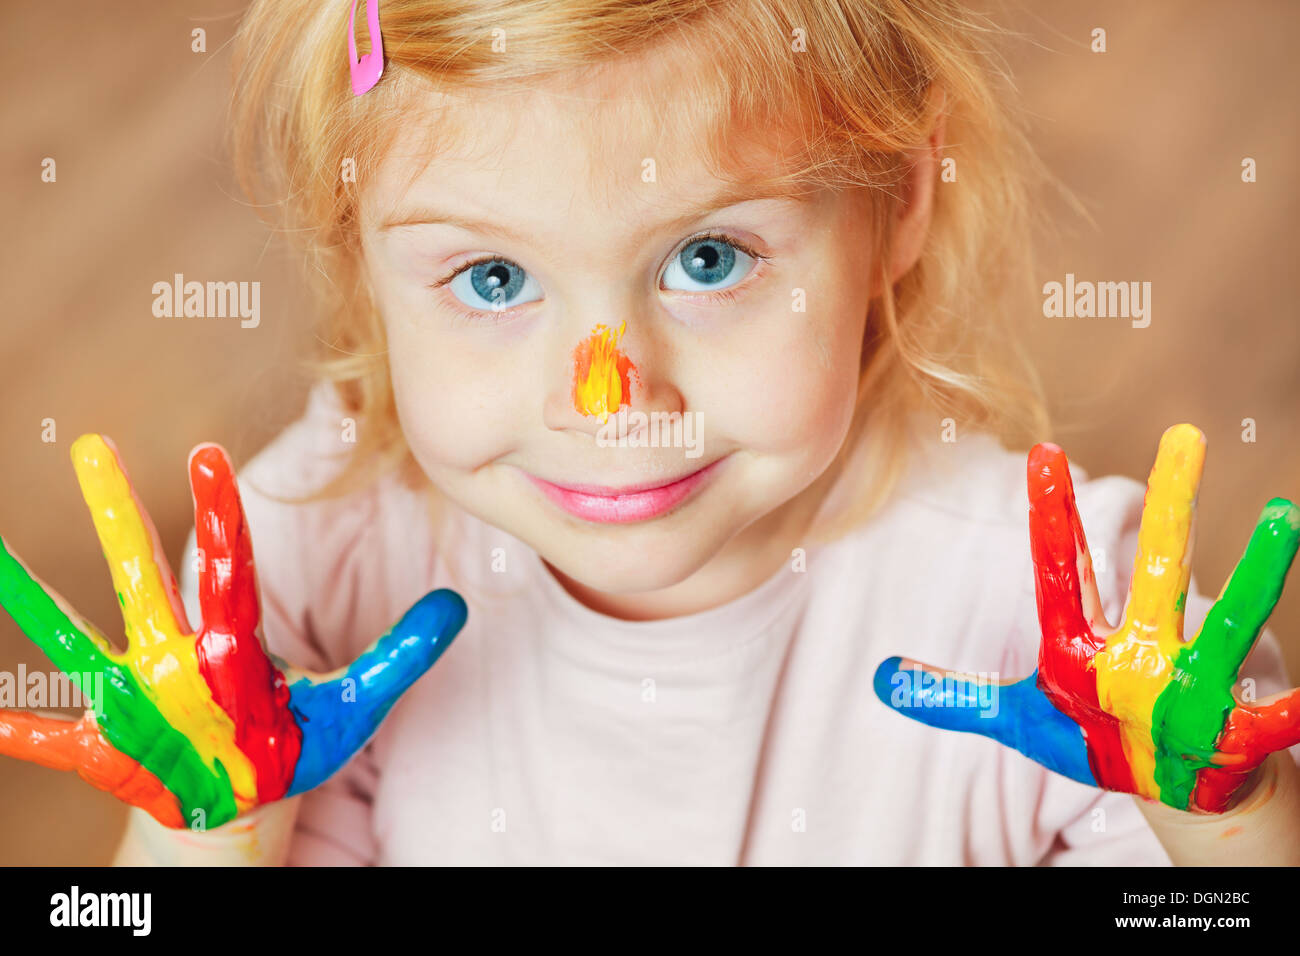 Cute little girl with painted hands looking at camera. Stock Photo